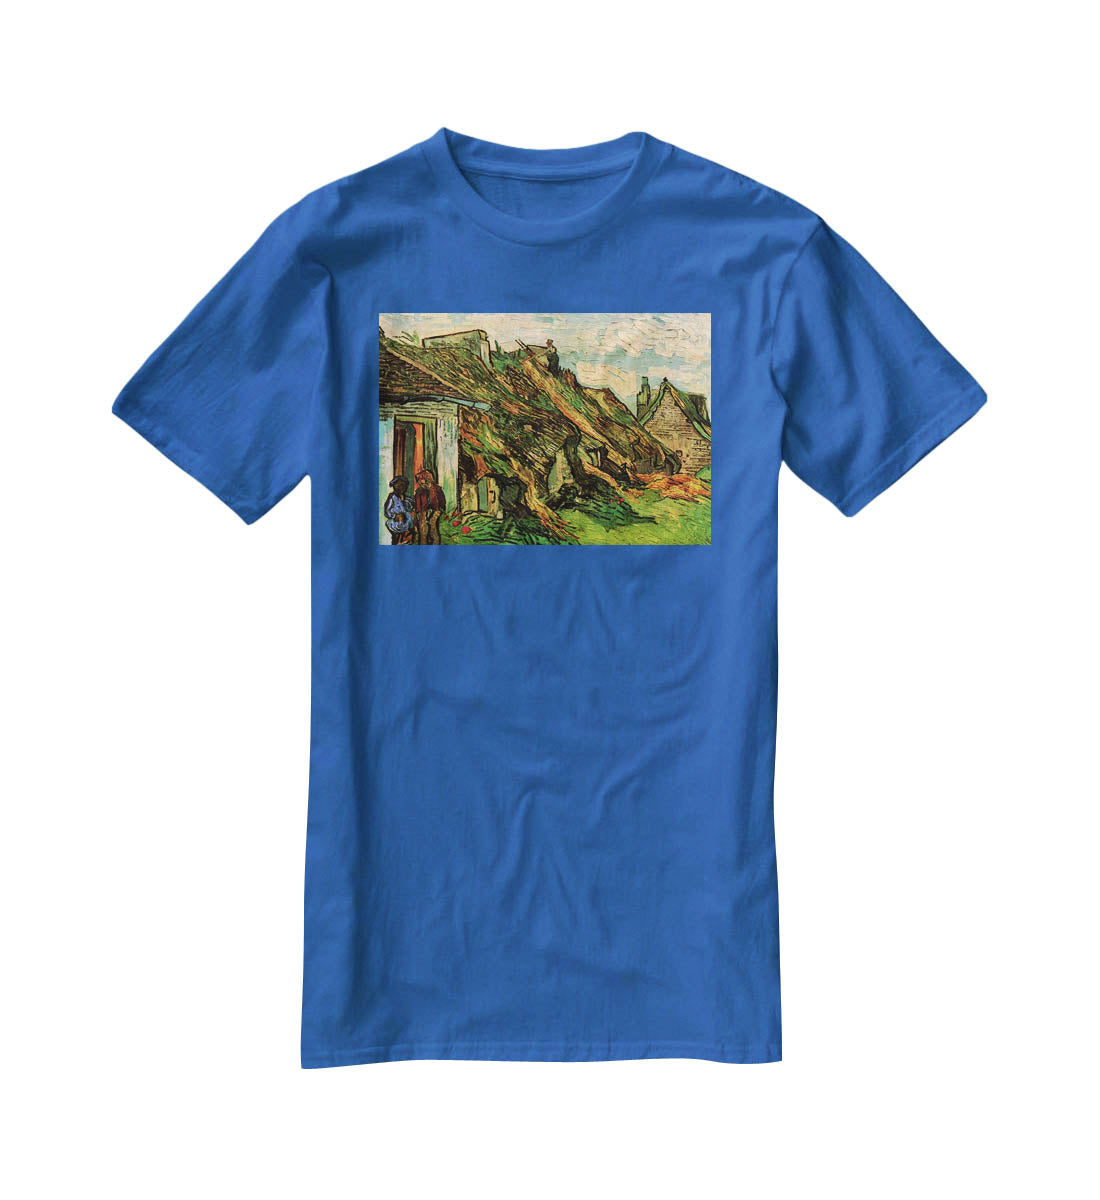 Thatched Sandstone Cottages in Chaponval by Van Gogh T-Shirt - Canvas Art Rocks - 2